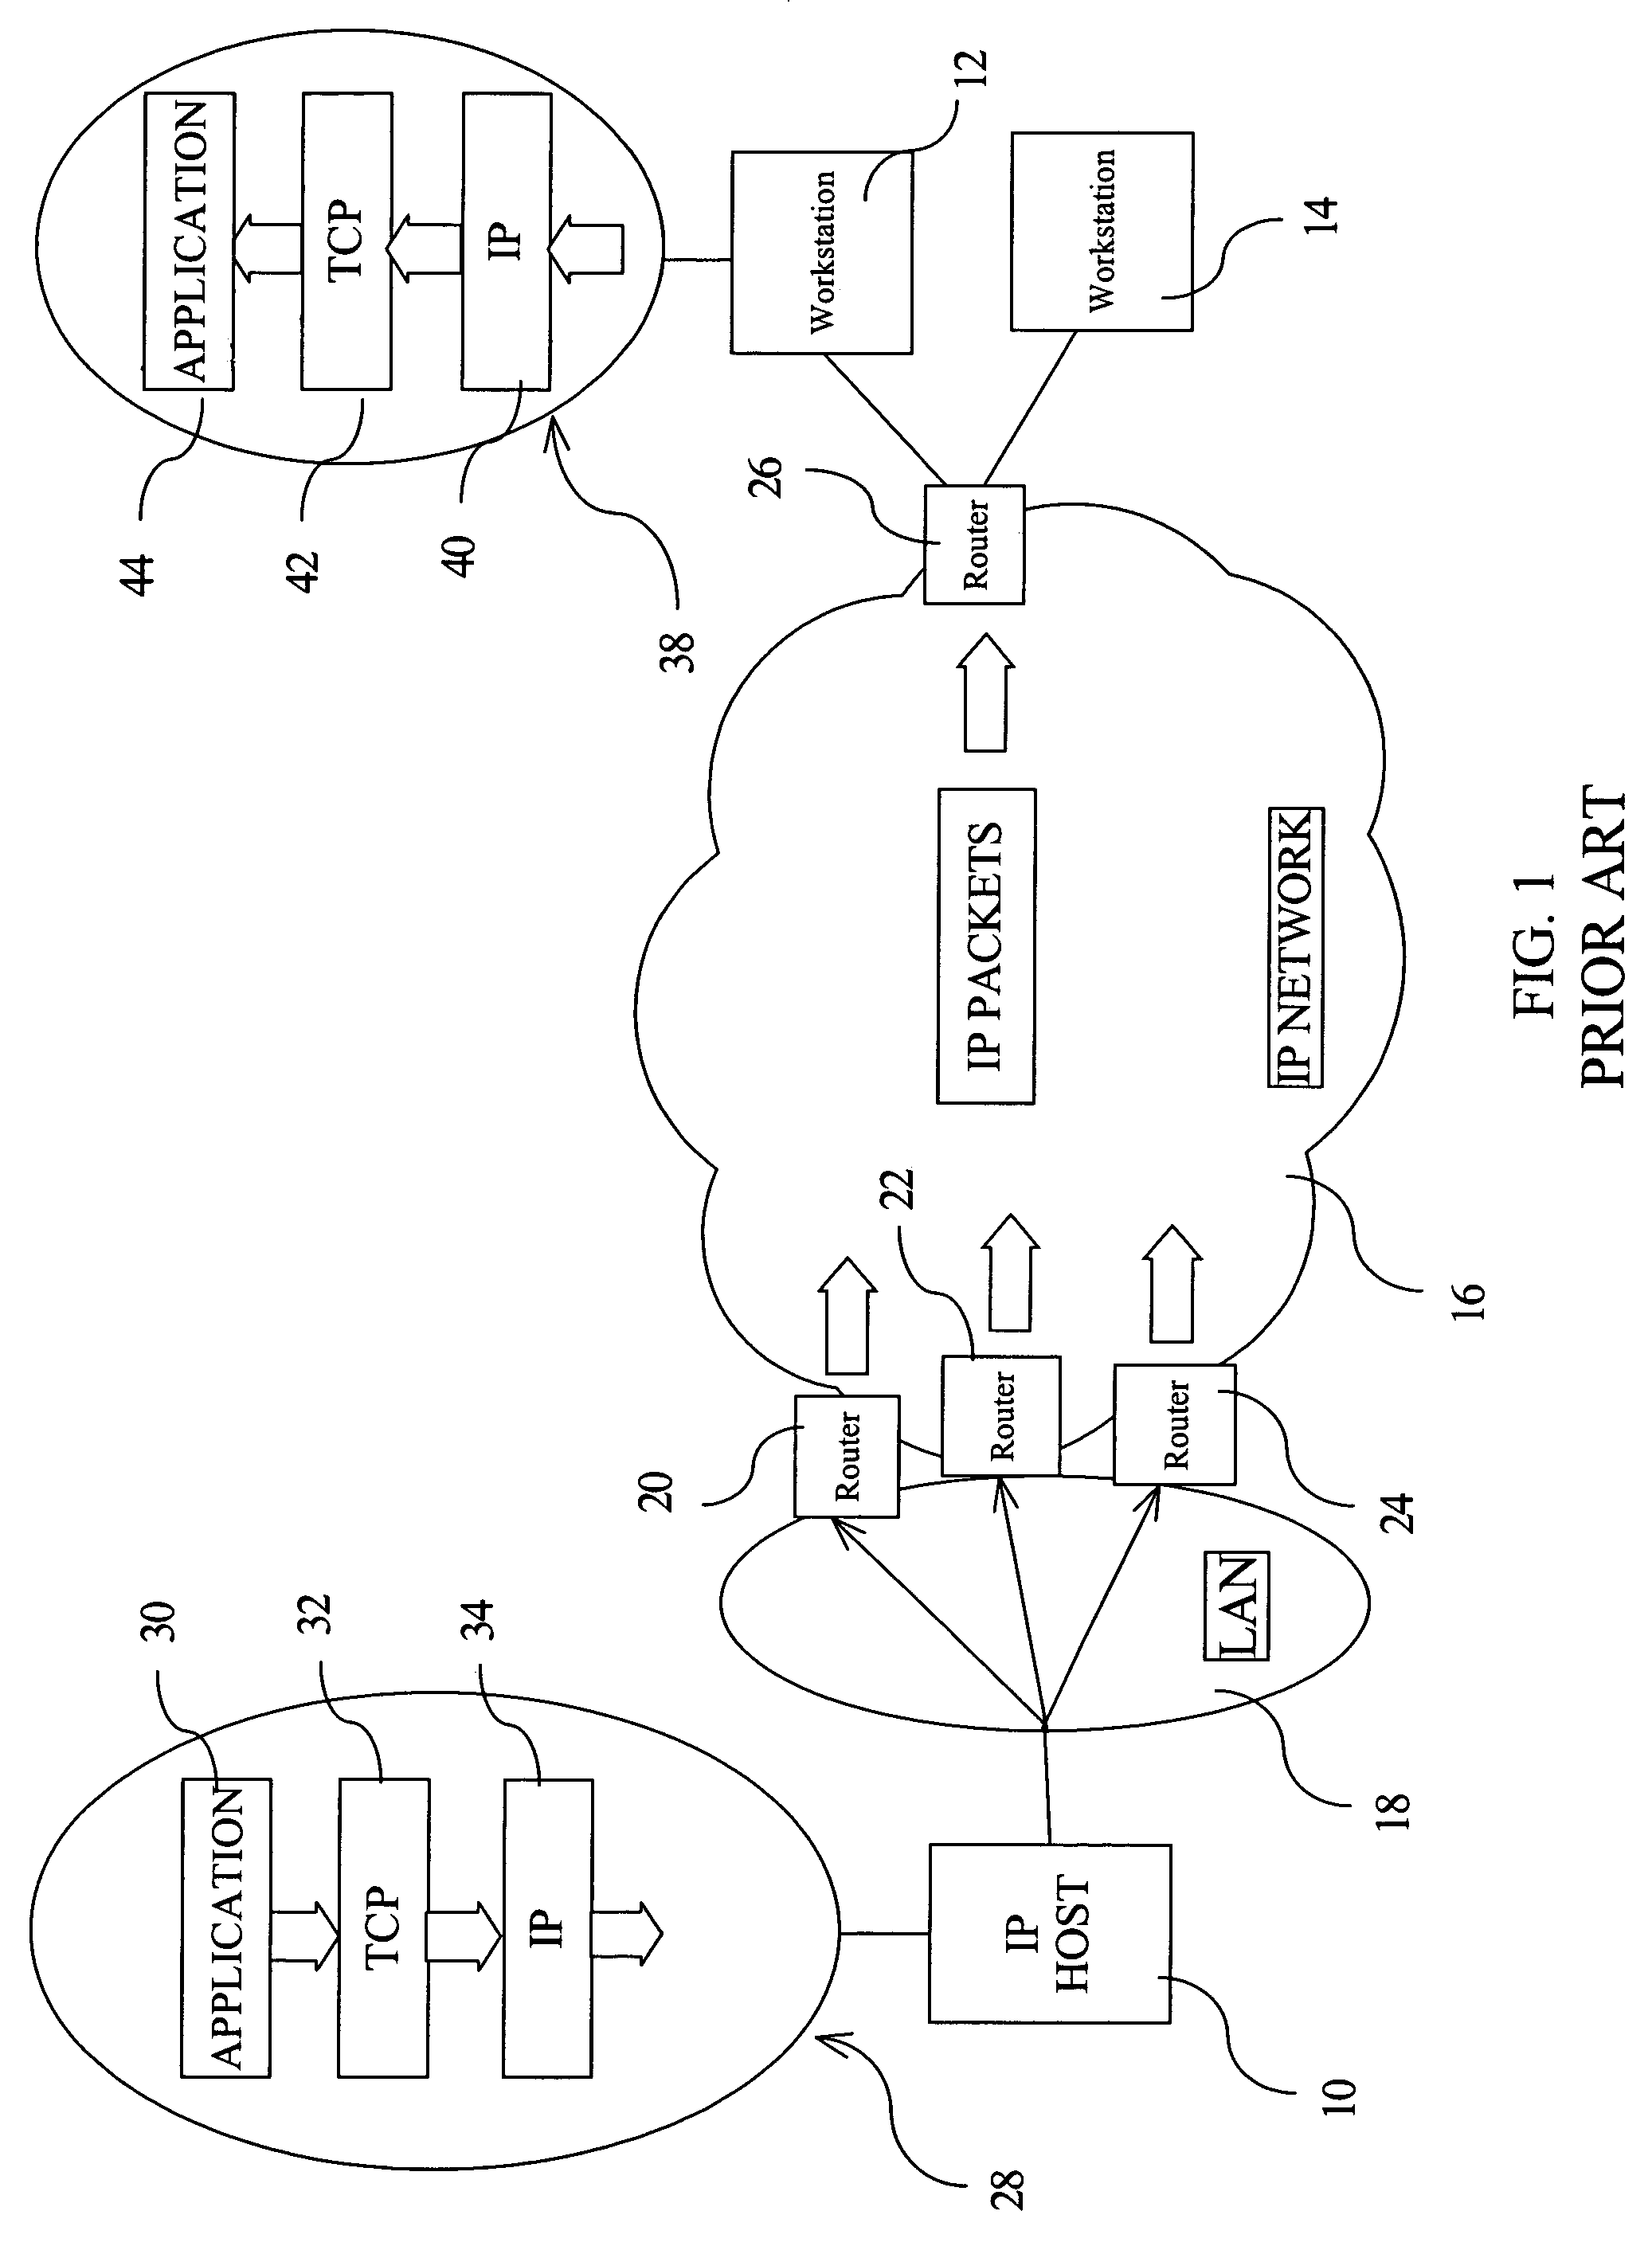 System and method for improved load balancing and high availability in a data processing system having an IP host with a MARP layer